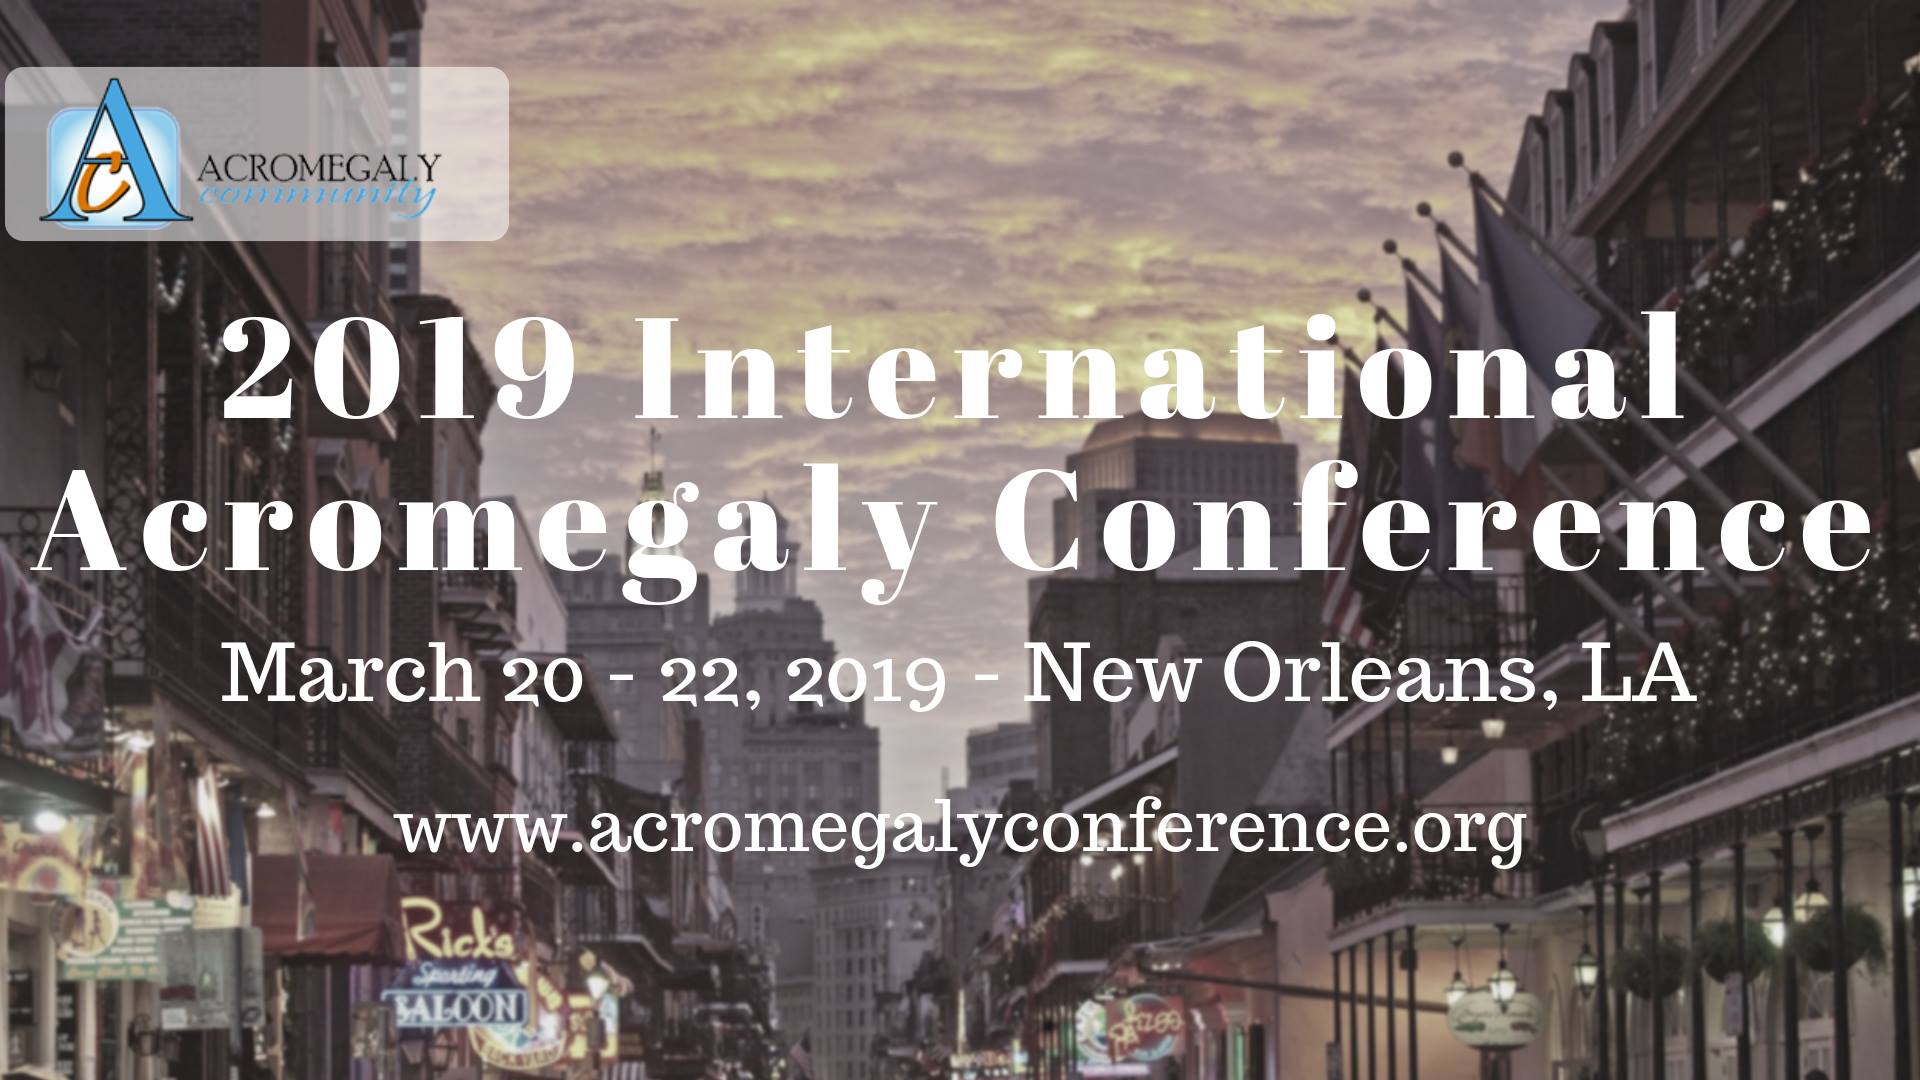 The 2019 National/International Acromegaly Conference